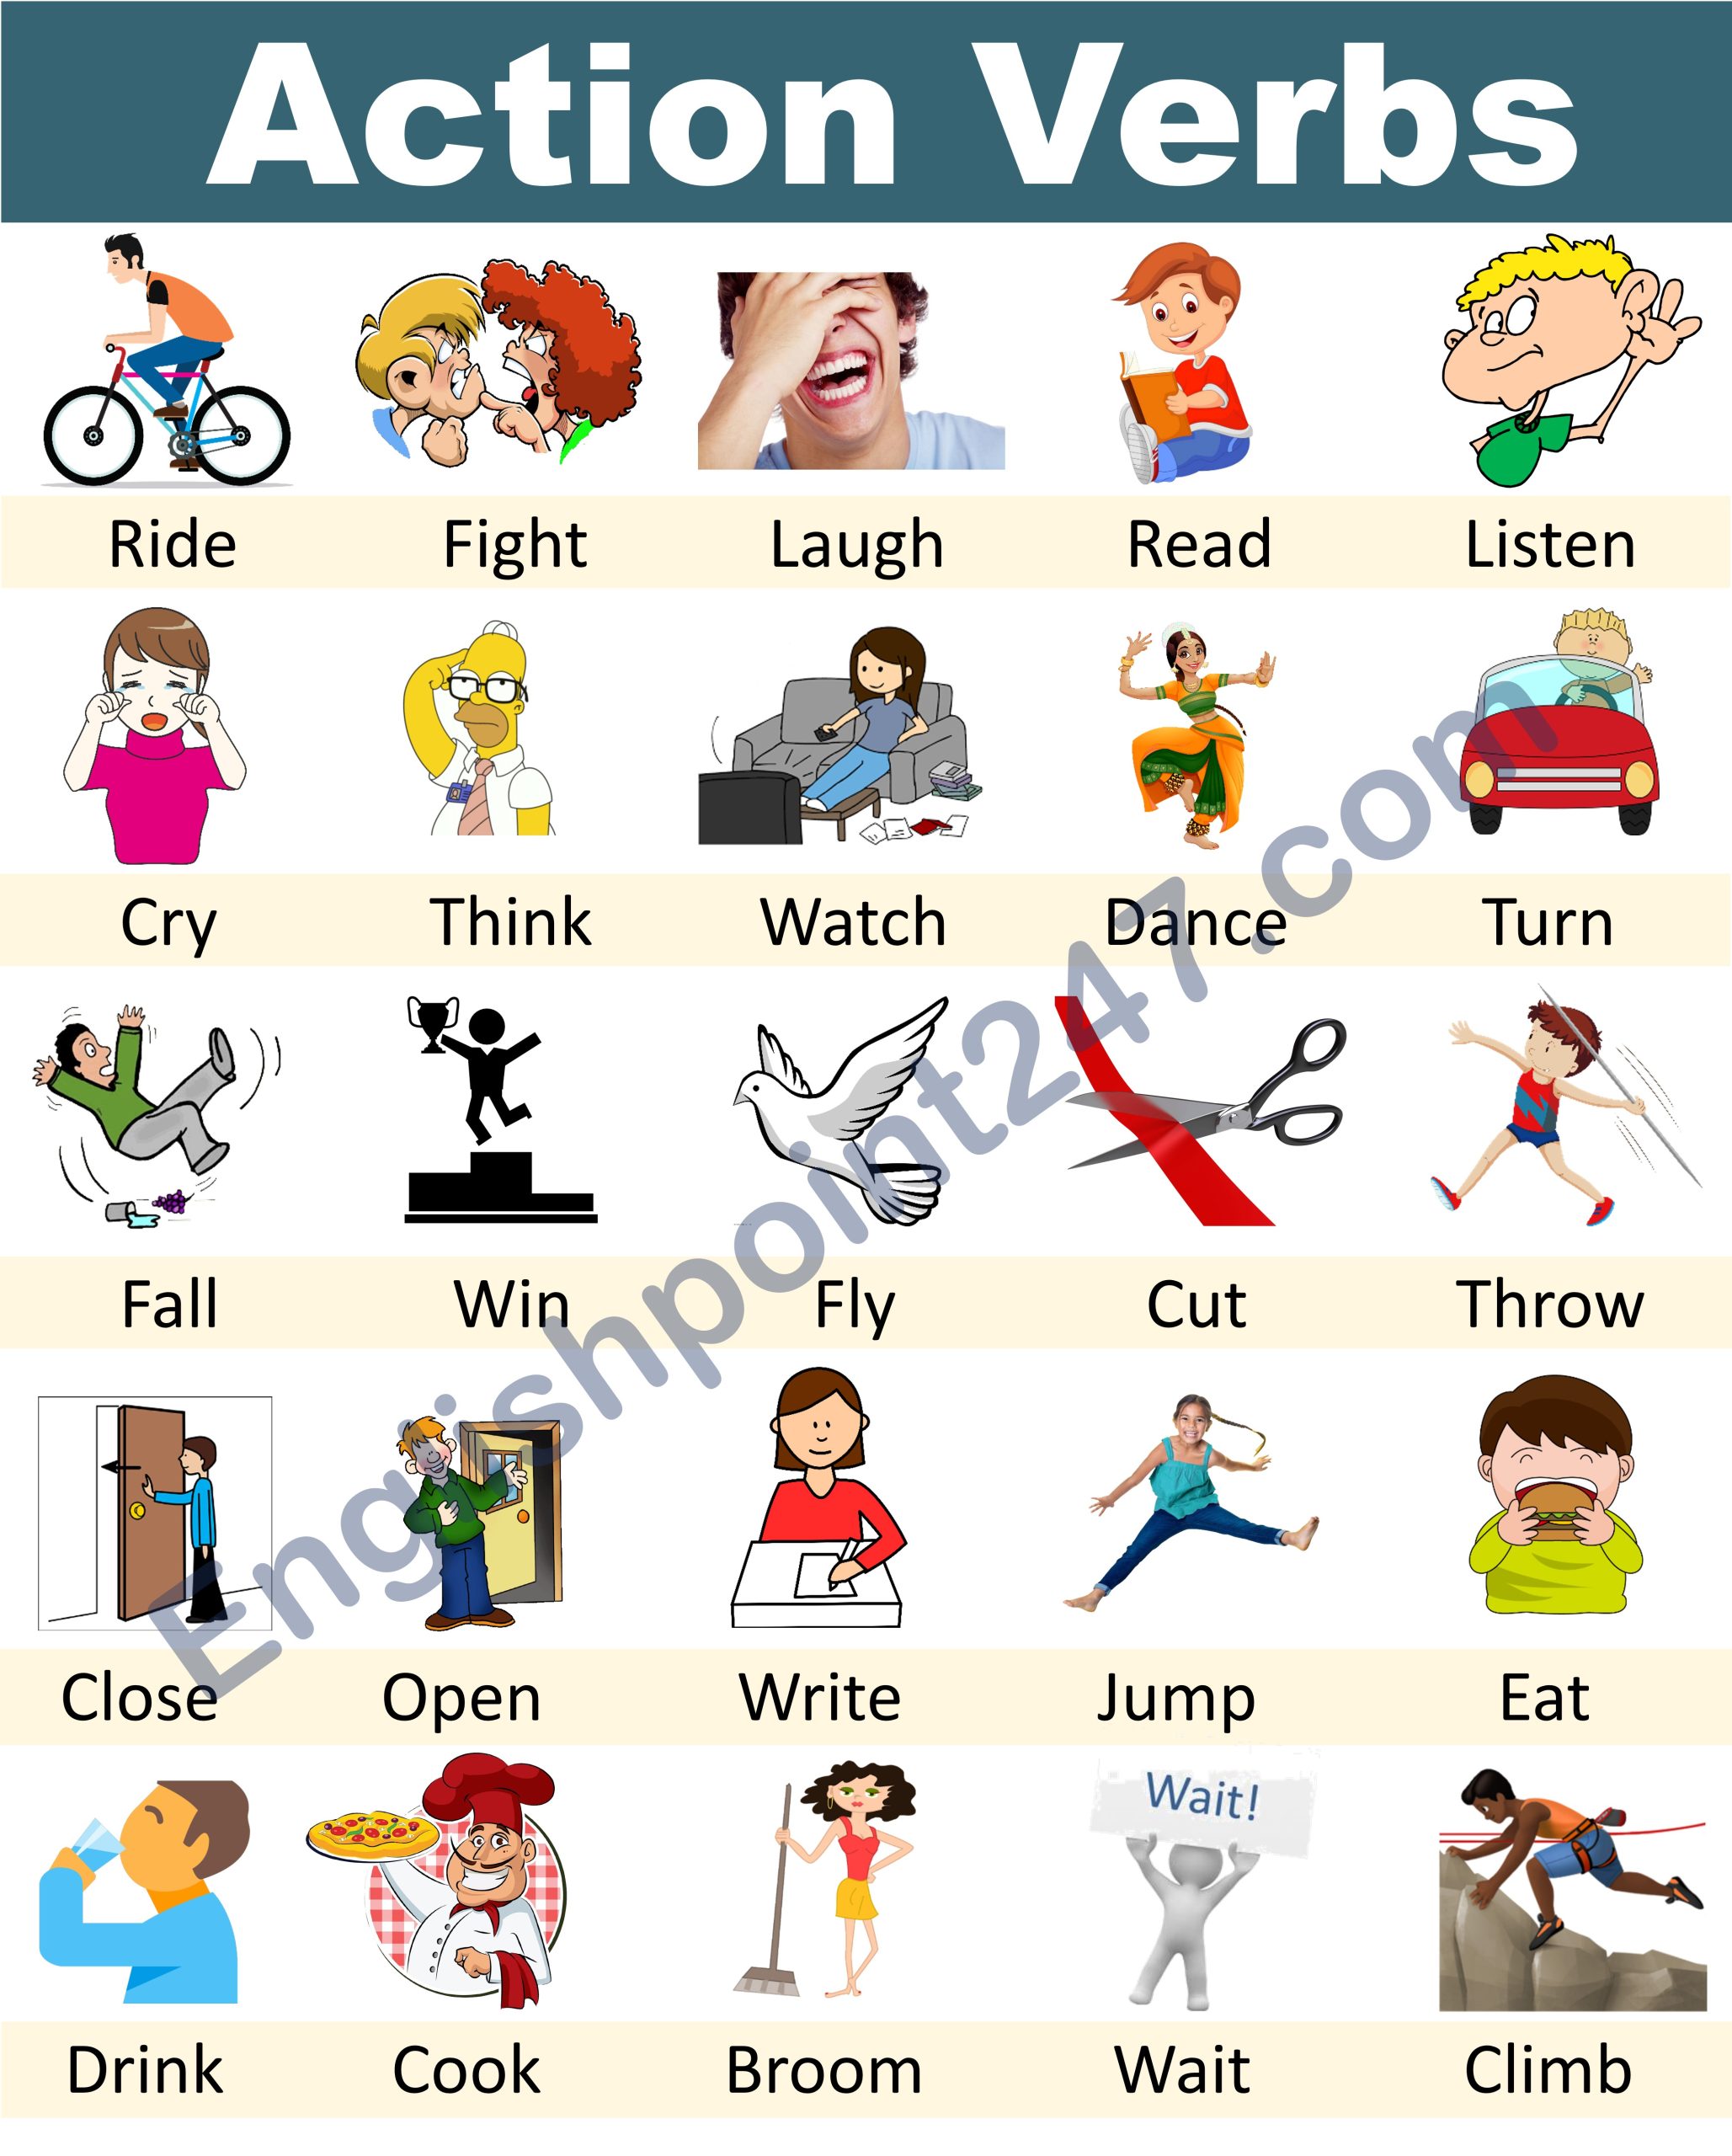 Action Verbs Following Is A List Of Useful Action Verbs In English My